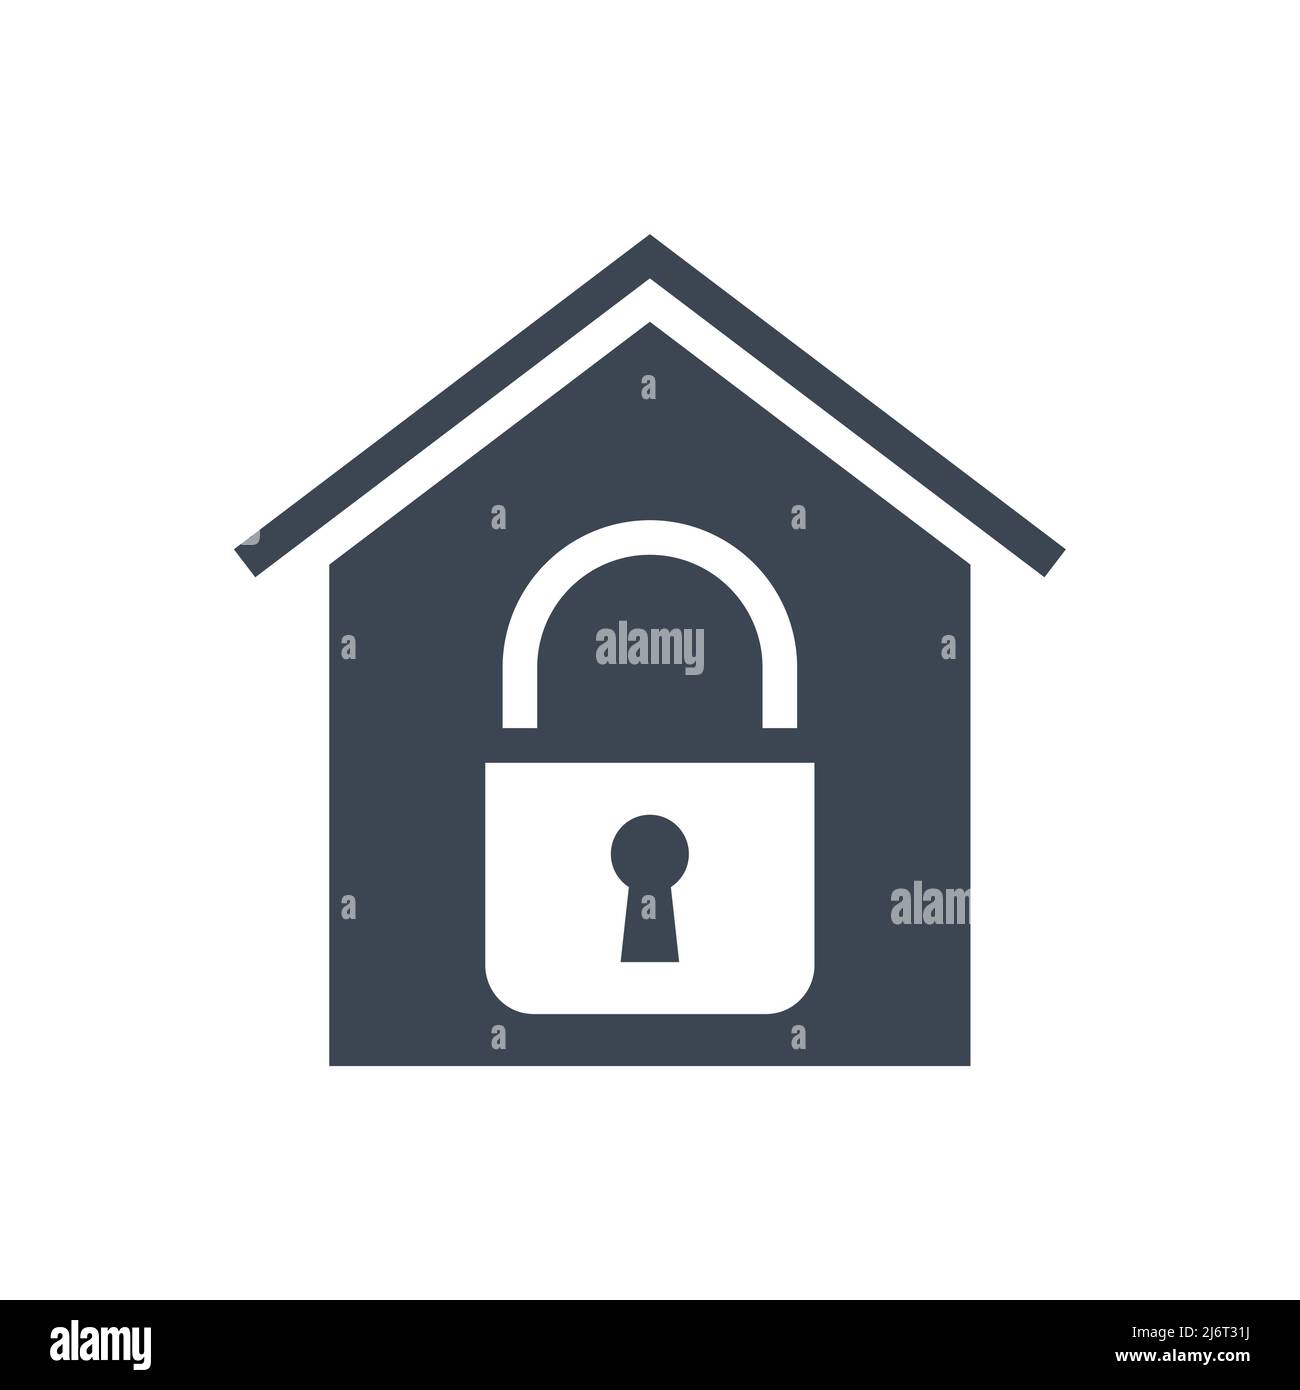 Quarantine related vector glyph icon. Simple house icon with lock inside. Quarantine sign. Isolated on white background. Editable vector illustration Stock Vector